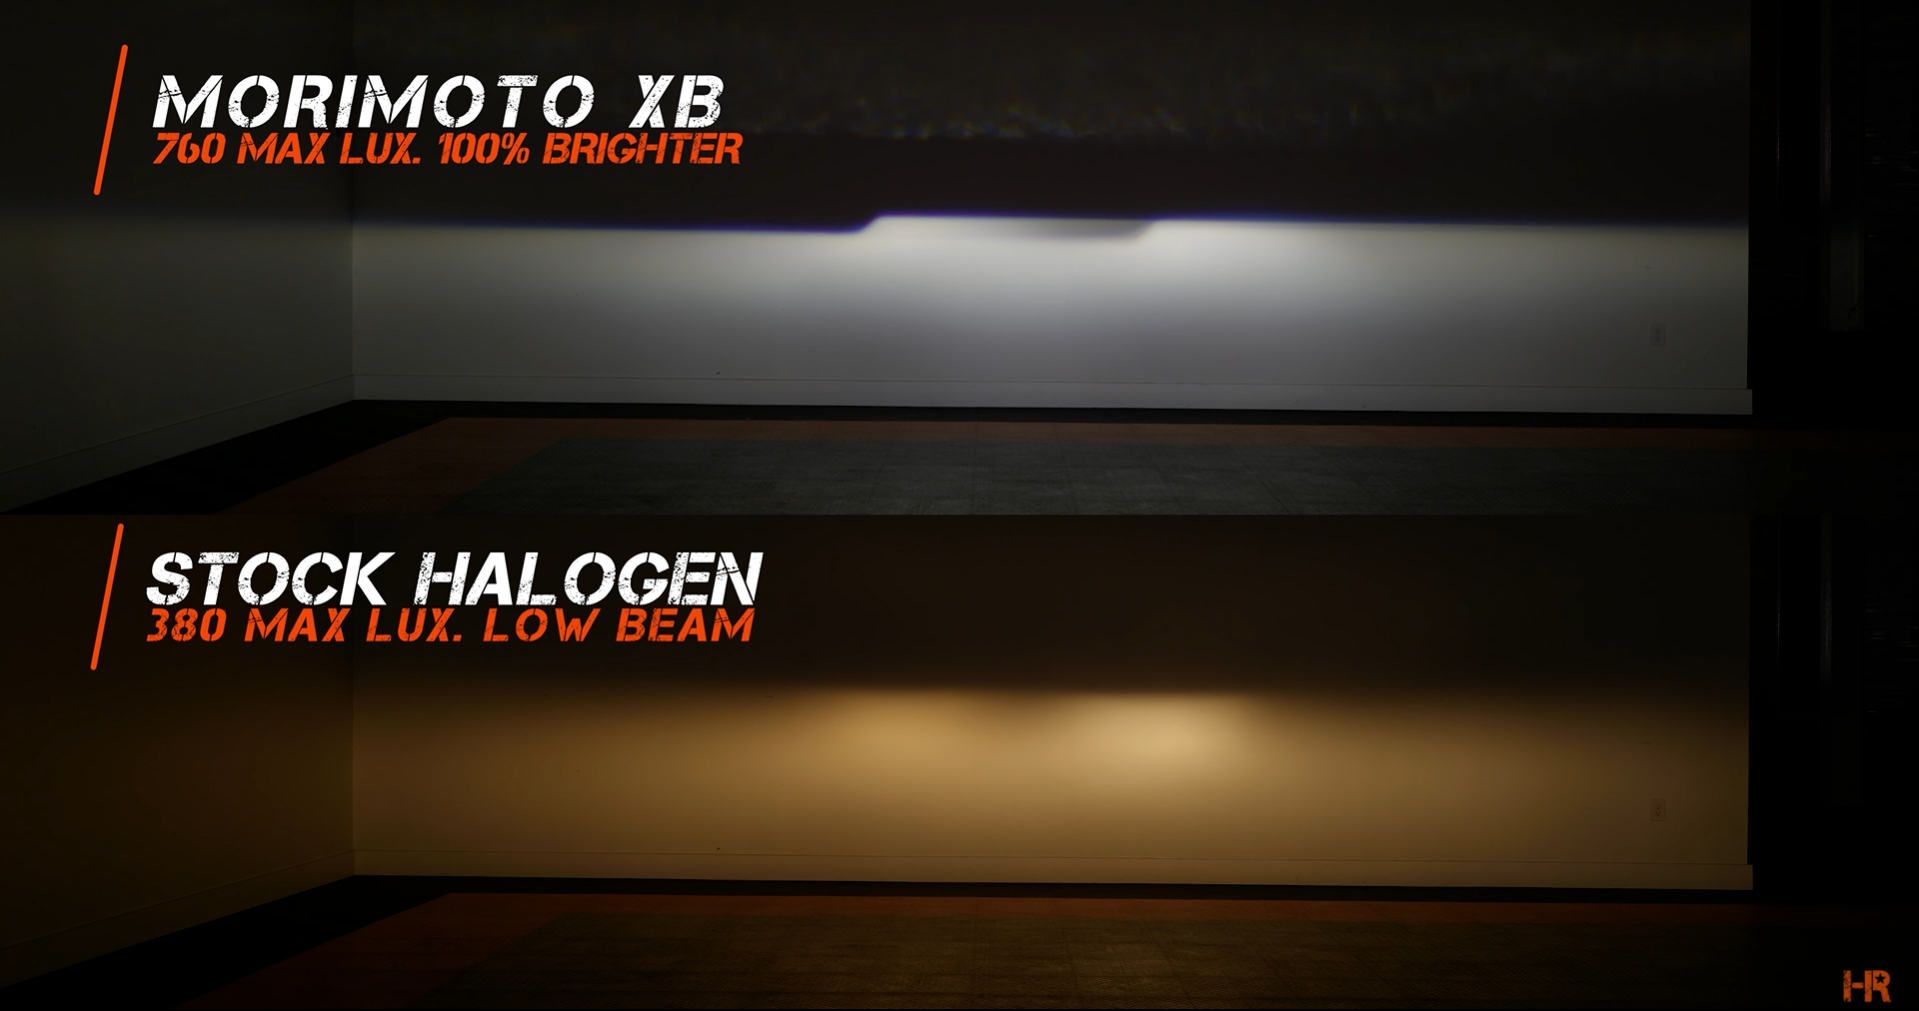 A comparison of the beam pattern between the OEM Ford Ranger halogen headlight and the Morimoto XB LED headlight.